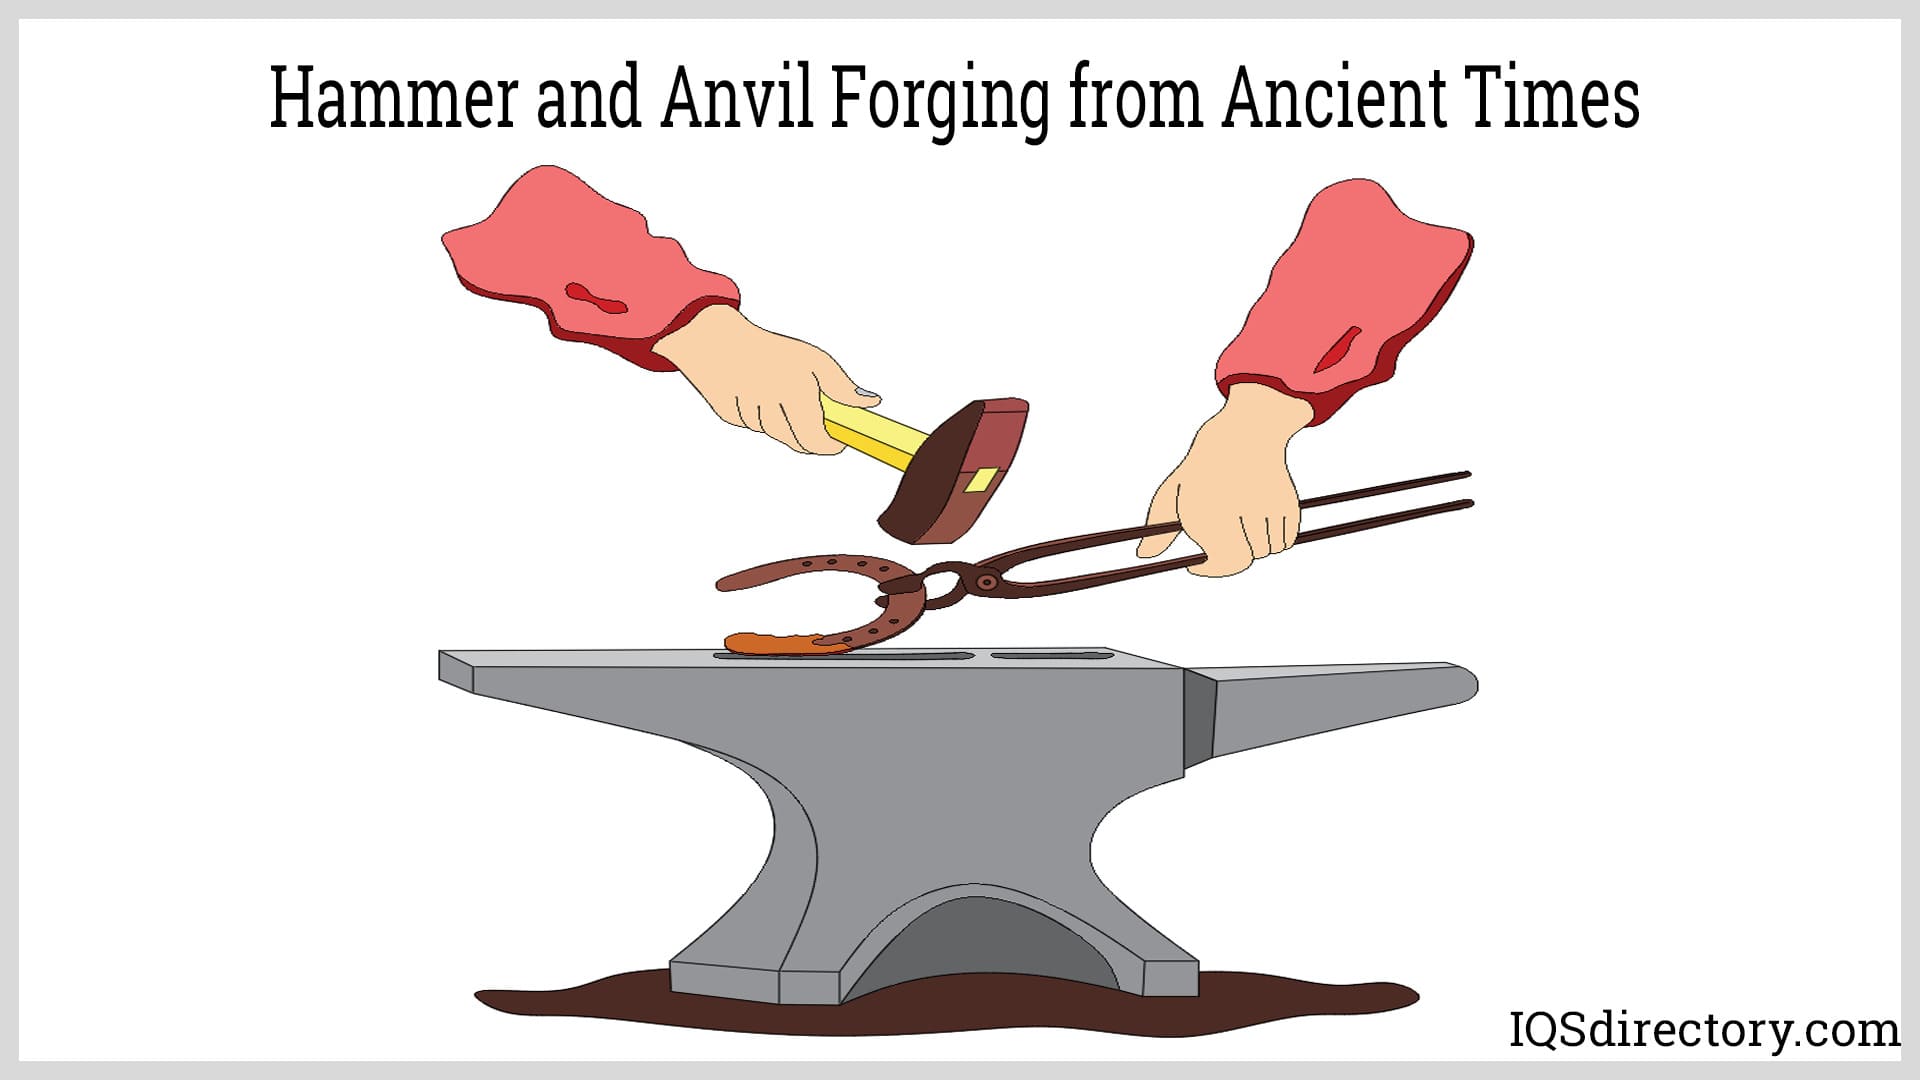 Hammer and Anvil Forging from Ancient Times